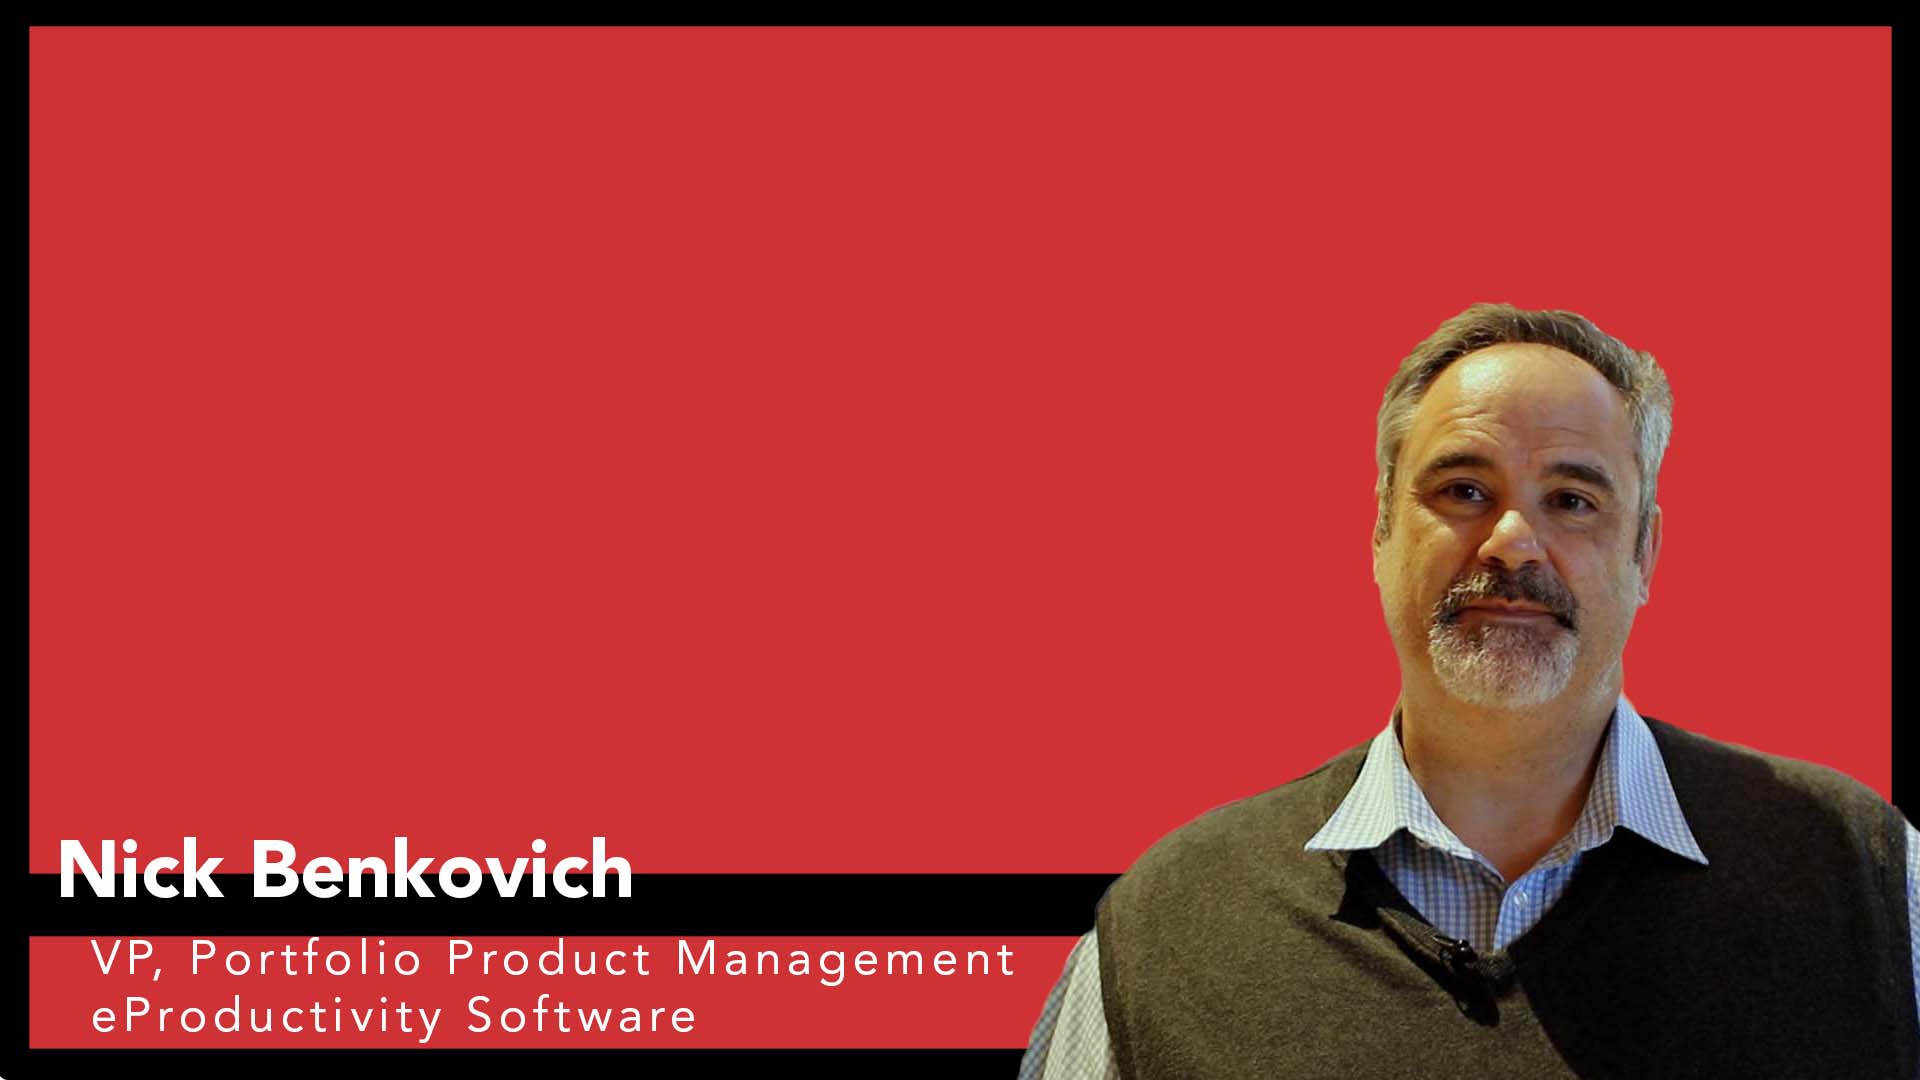 Nick Benkovich on the Future of eProductivity Software